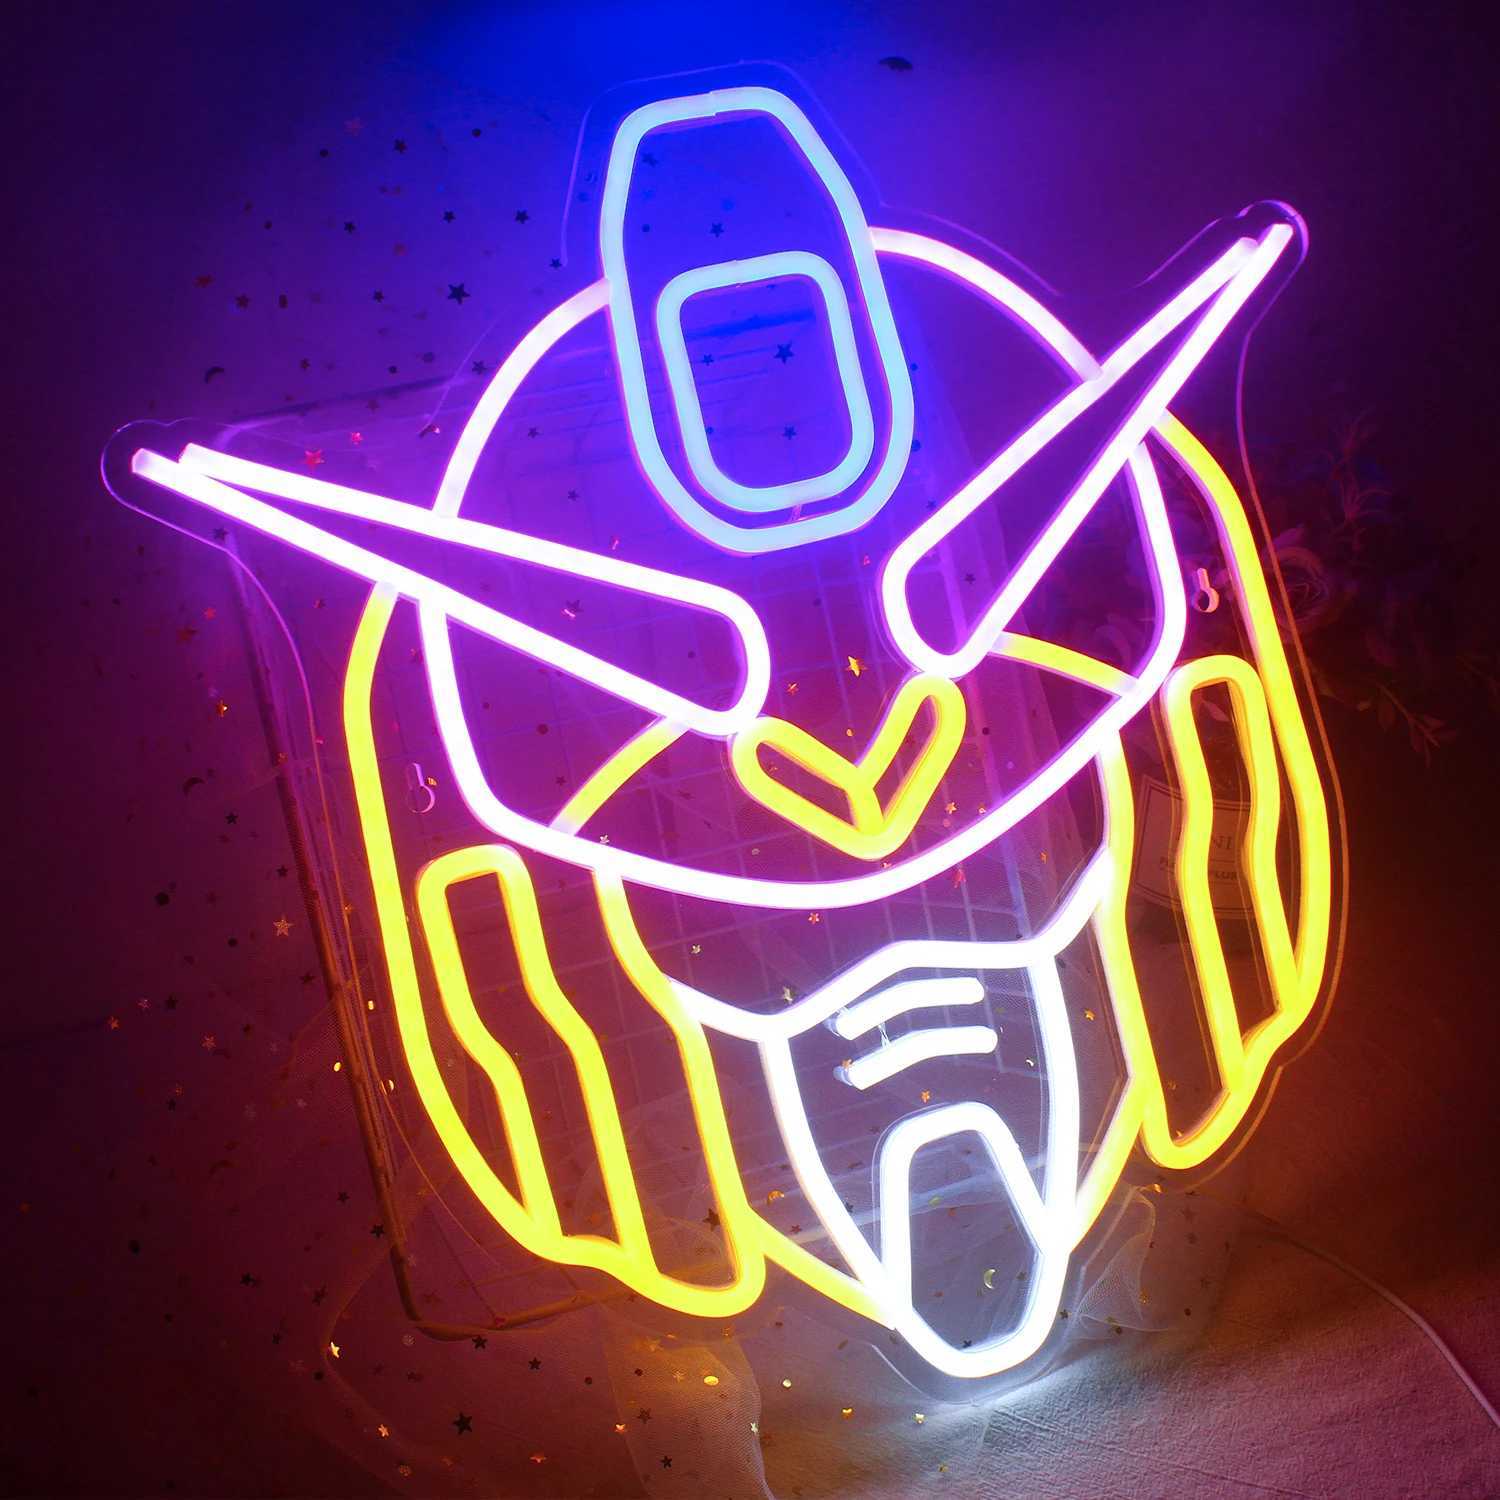 LED-neonreclame Ineonlife Transformers Neonreclame Led-licht Slaapkamer Letters USB Game Room Bar Party Indoor Home Arcade Shop Kunst Wanddecoratie YQ240126